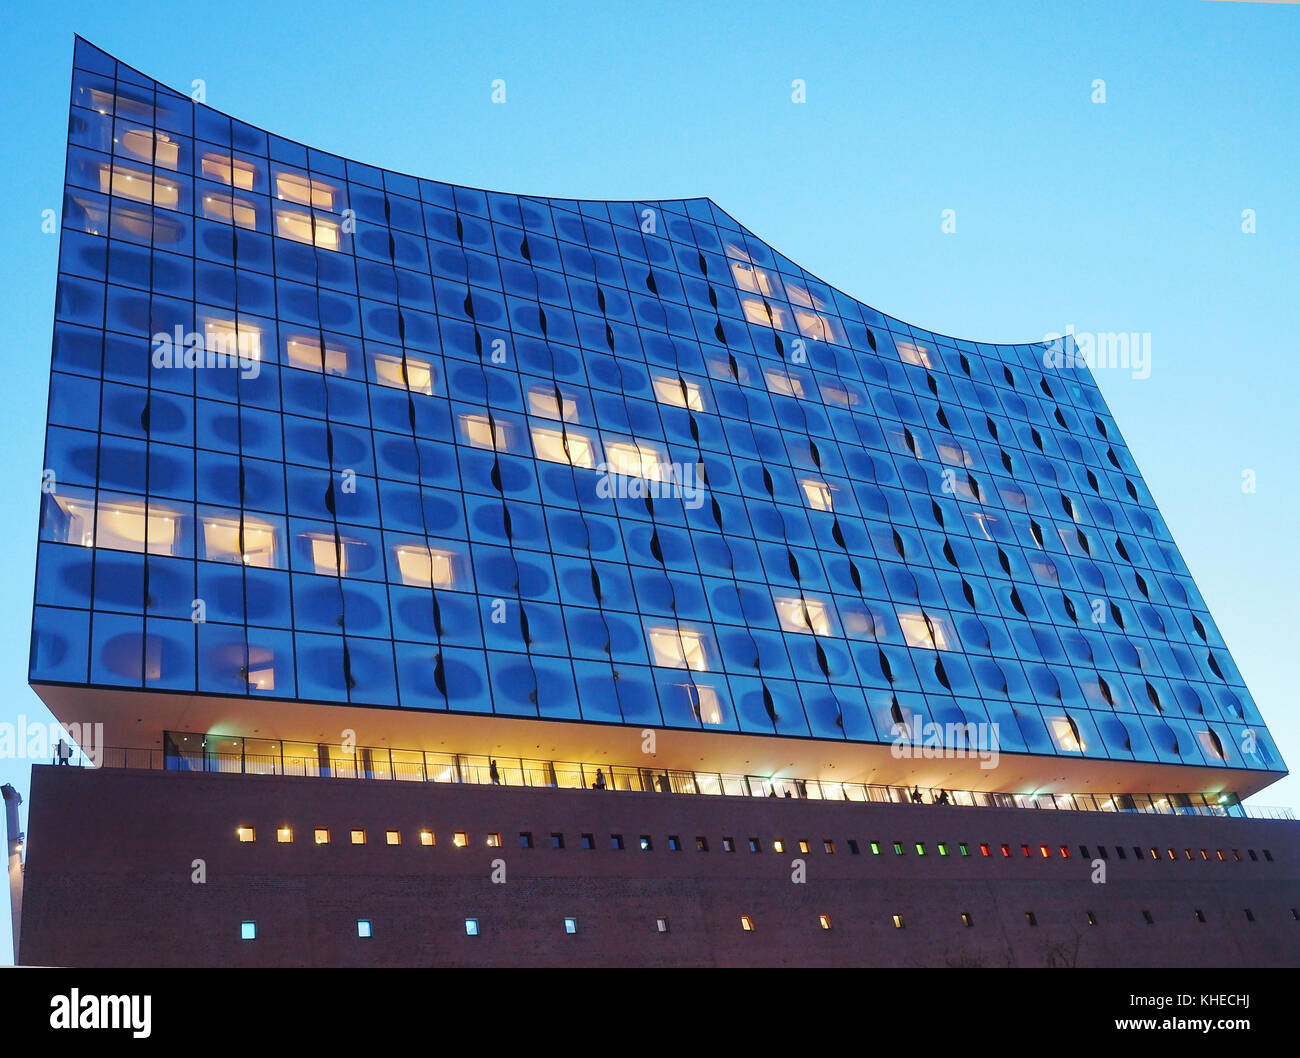 Elbphilharmonie at dawn. The building contains concert halls, a hotel and apartments (architects: Herzog & de Meuron) - Hamburg, Germany Stock Photo